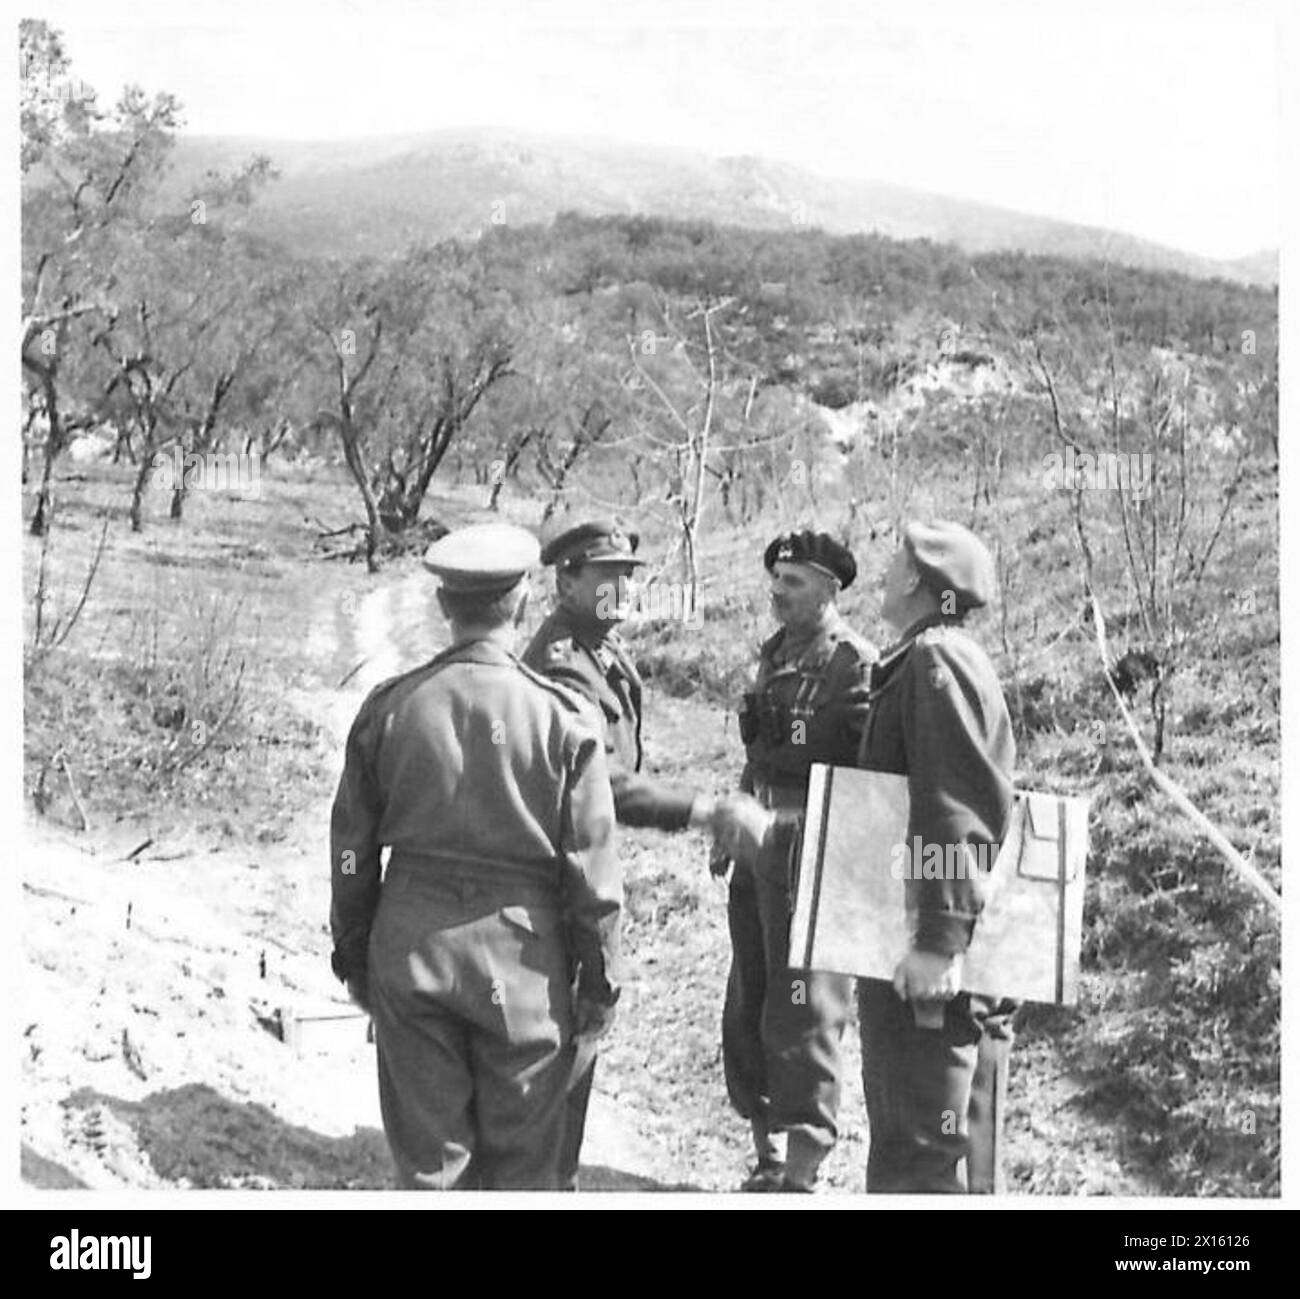 ALLIED ARMIES IN THE ITALIAN CAMPAIGN, 1943-1945 - General Władysław Anders, the CO of the 2nd Polish Corps (second from the right) introducing his adjutant, Lieutenant Eugeniusz Lubomirski to General Charles Keightley, the CO of the British 78th Infantry Division (second from the left), at the divisional HQ at Cervaro (near Cassino).Photograph taken during General Anders' visit to the 78th Division British Army, Polish Army, Polish Armed Forces in the West, Polish Corps, II, 78th Infantry Division, British Army, 8th Army, Anders, Władysław, Keightley, Charles Frederic, Lubomirski, Eugeniusz Stock Photo